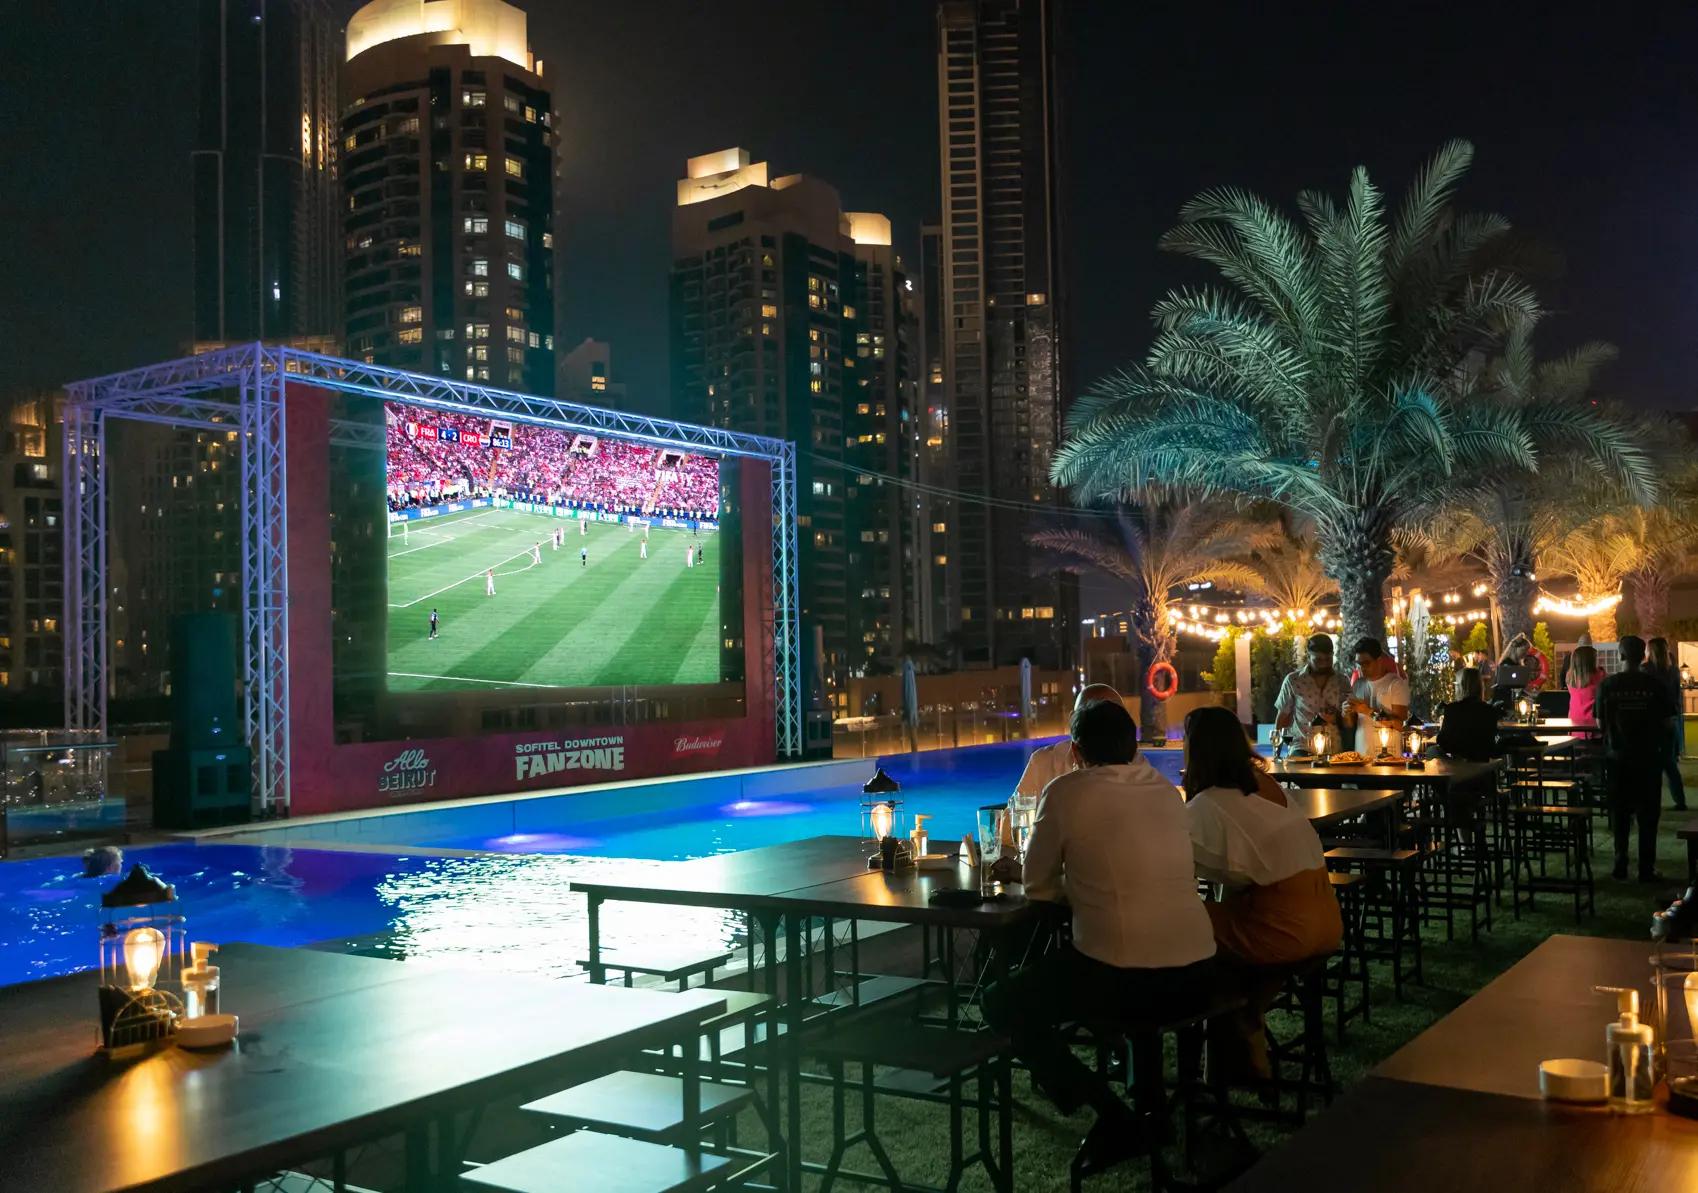 FOOTBALL FANS IN DUBAI, CHECK OUT THE SOFITEL DOWNTOWN FANZONE NOW!